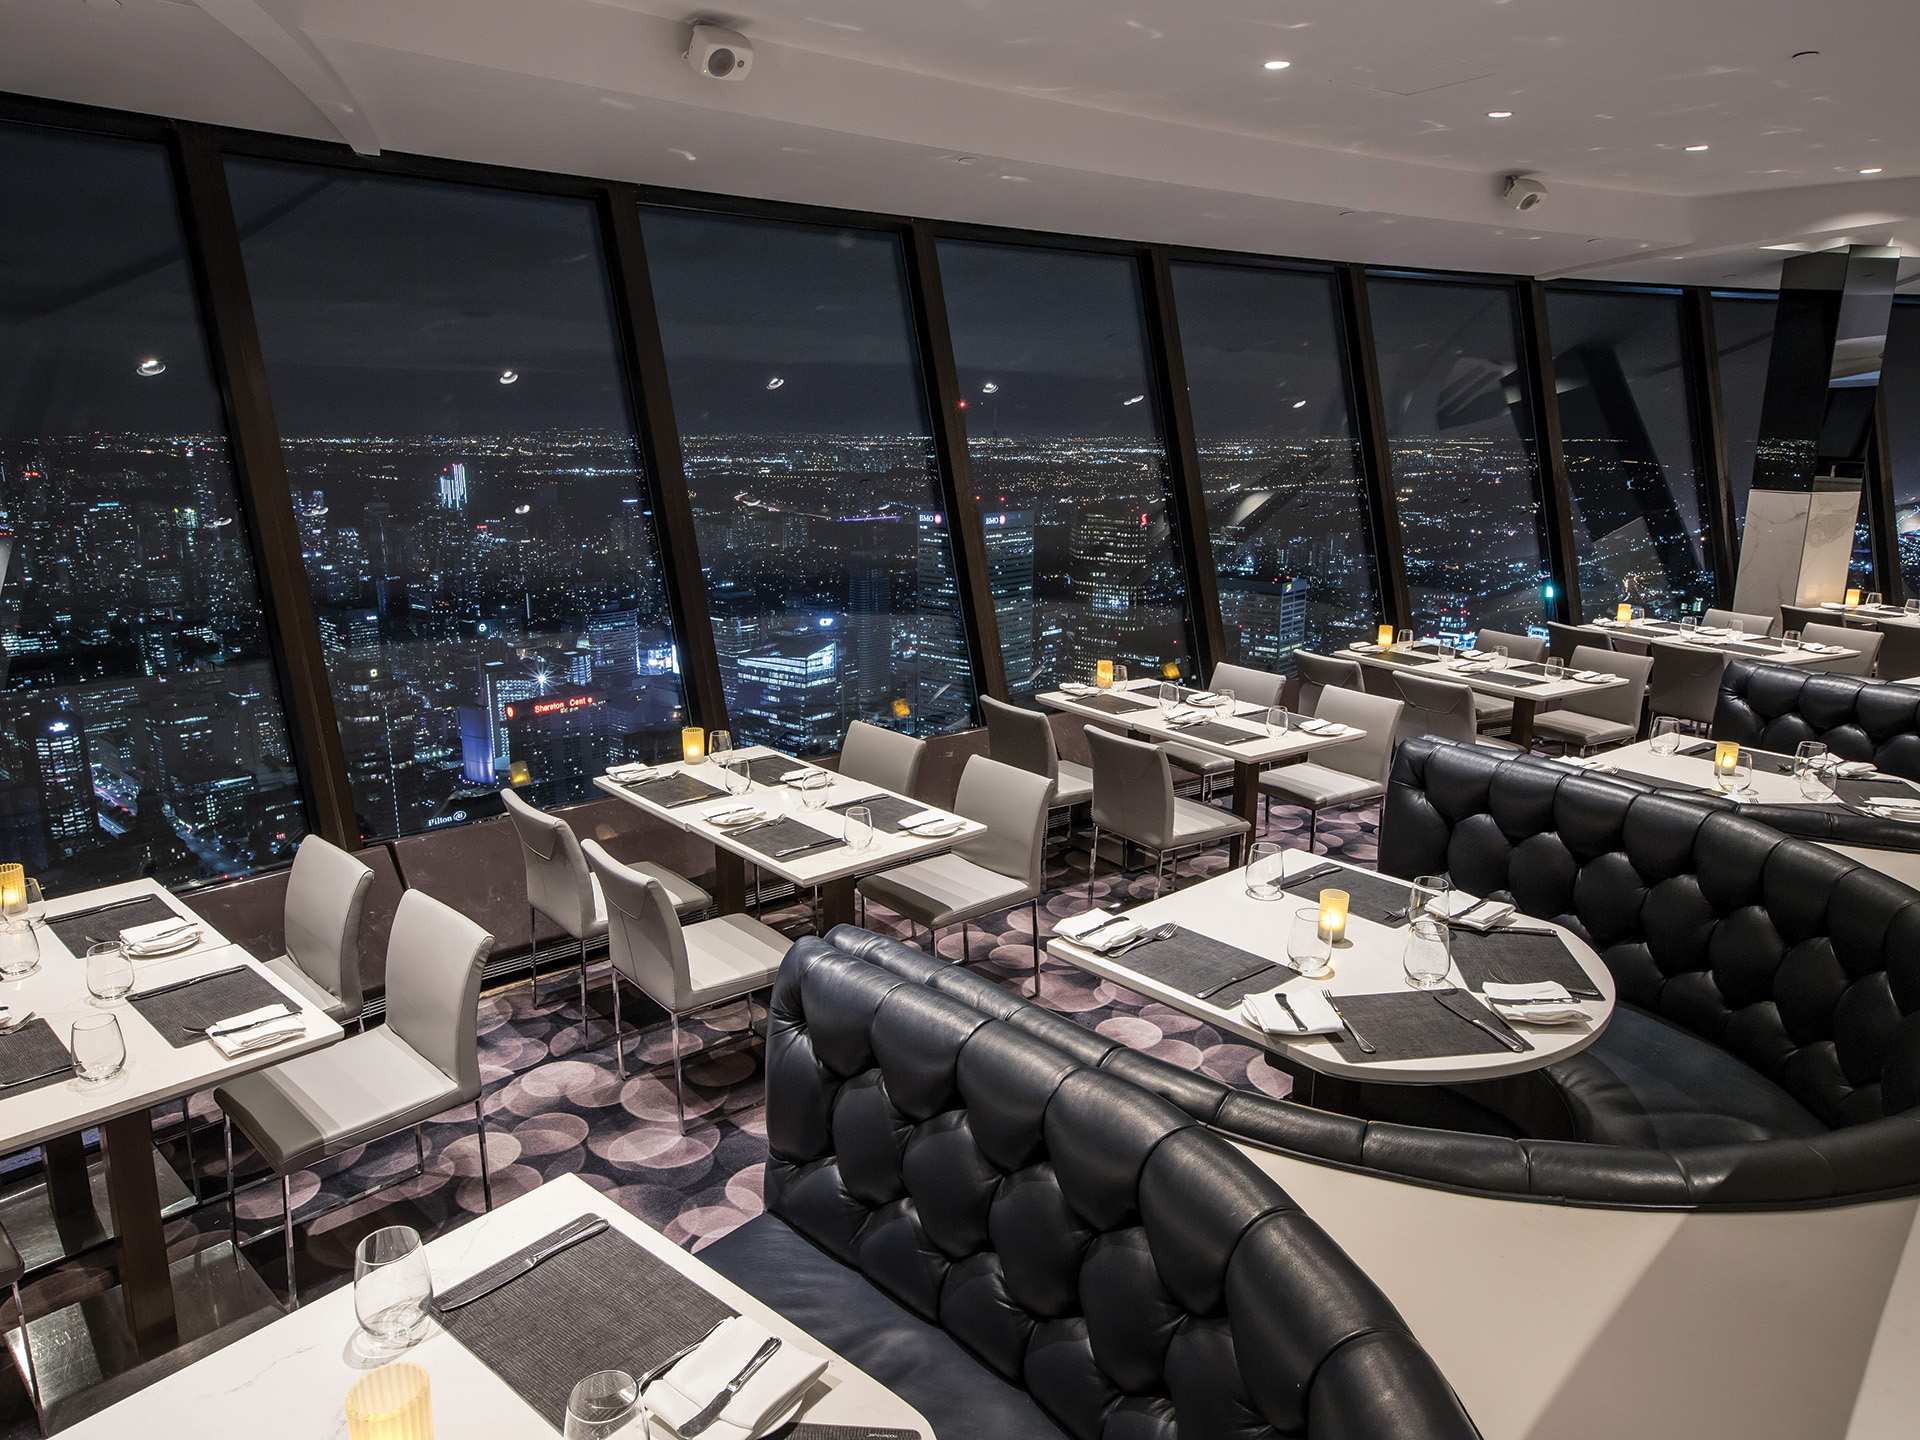 Winterlicious | Dining room overlooking Toronto at 360 The Restaurant at the CN Tower